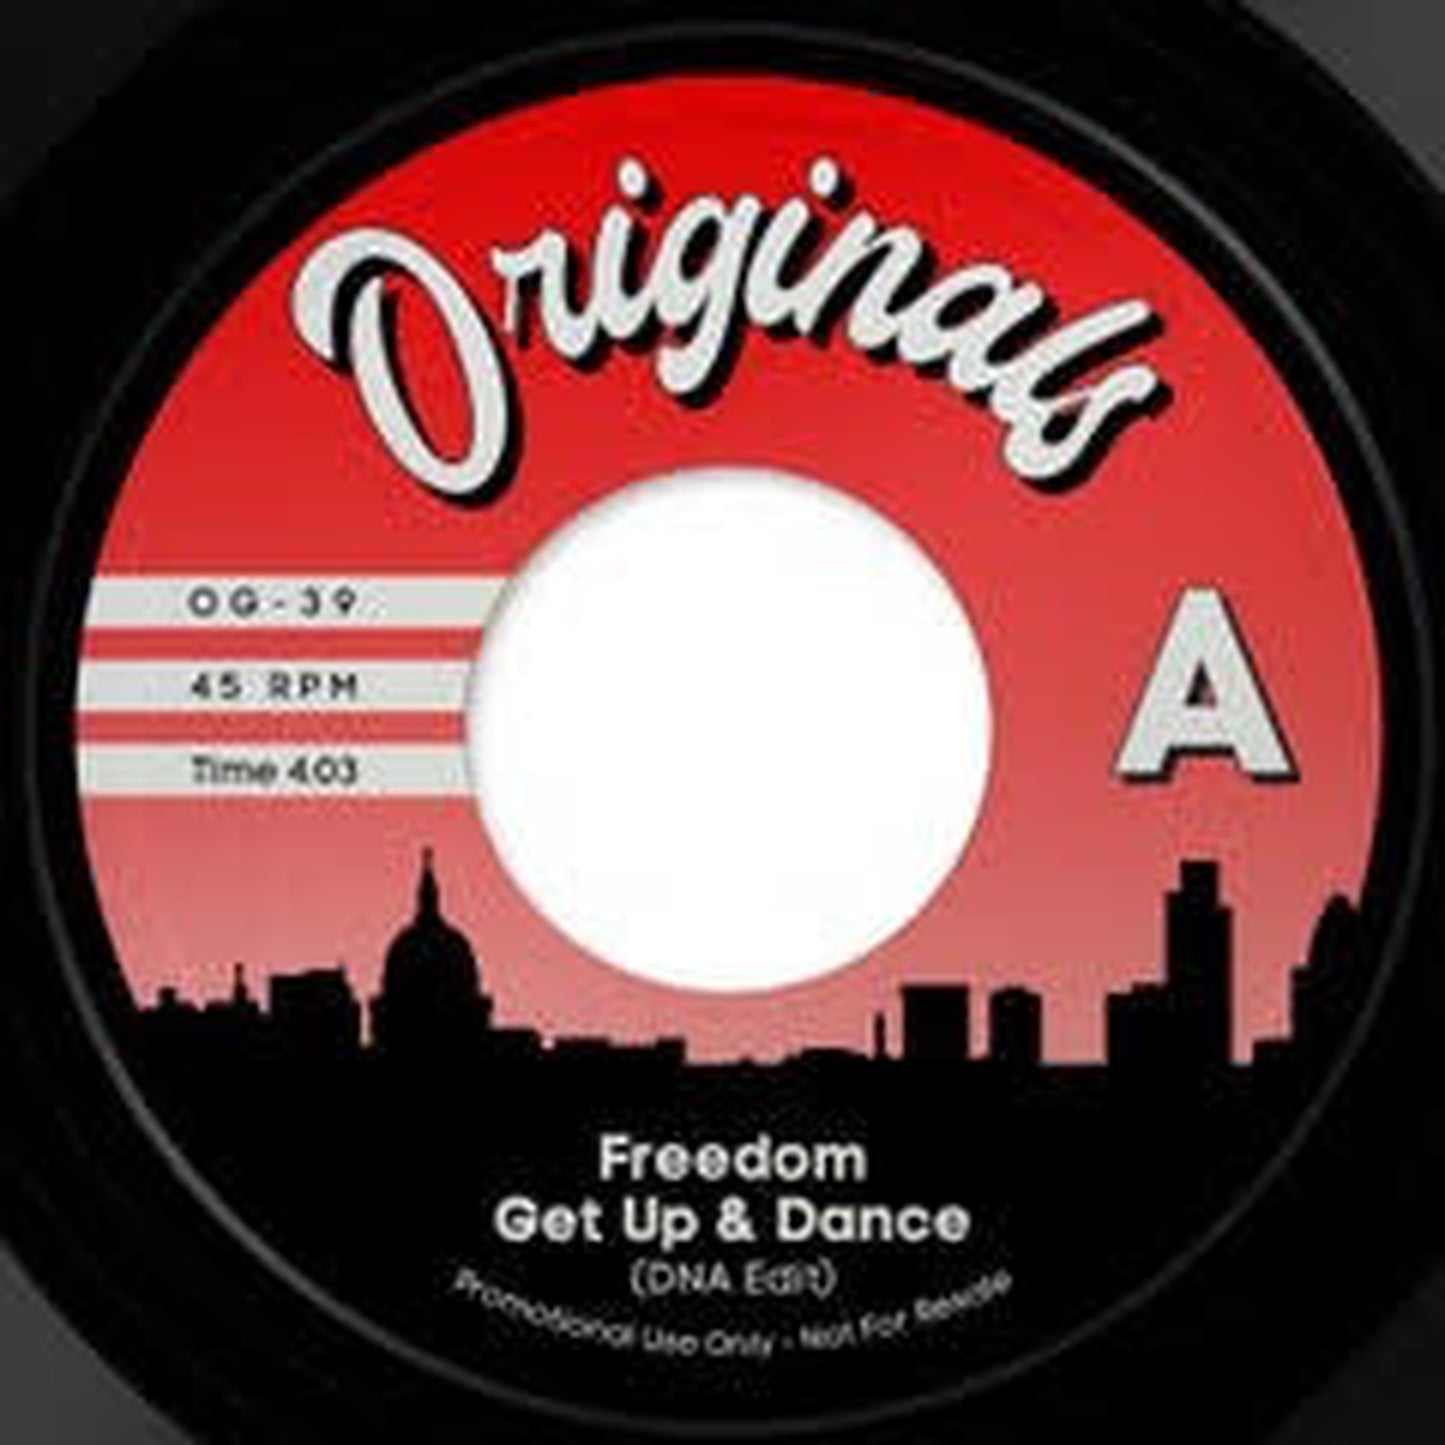 【7"】Freedom / SWV - Get Up & Dance / Anything feat. Wu-Tang Clan